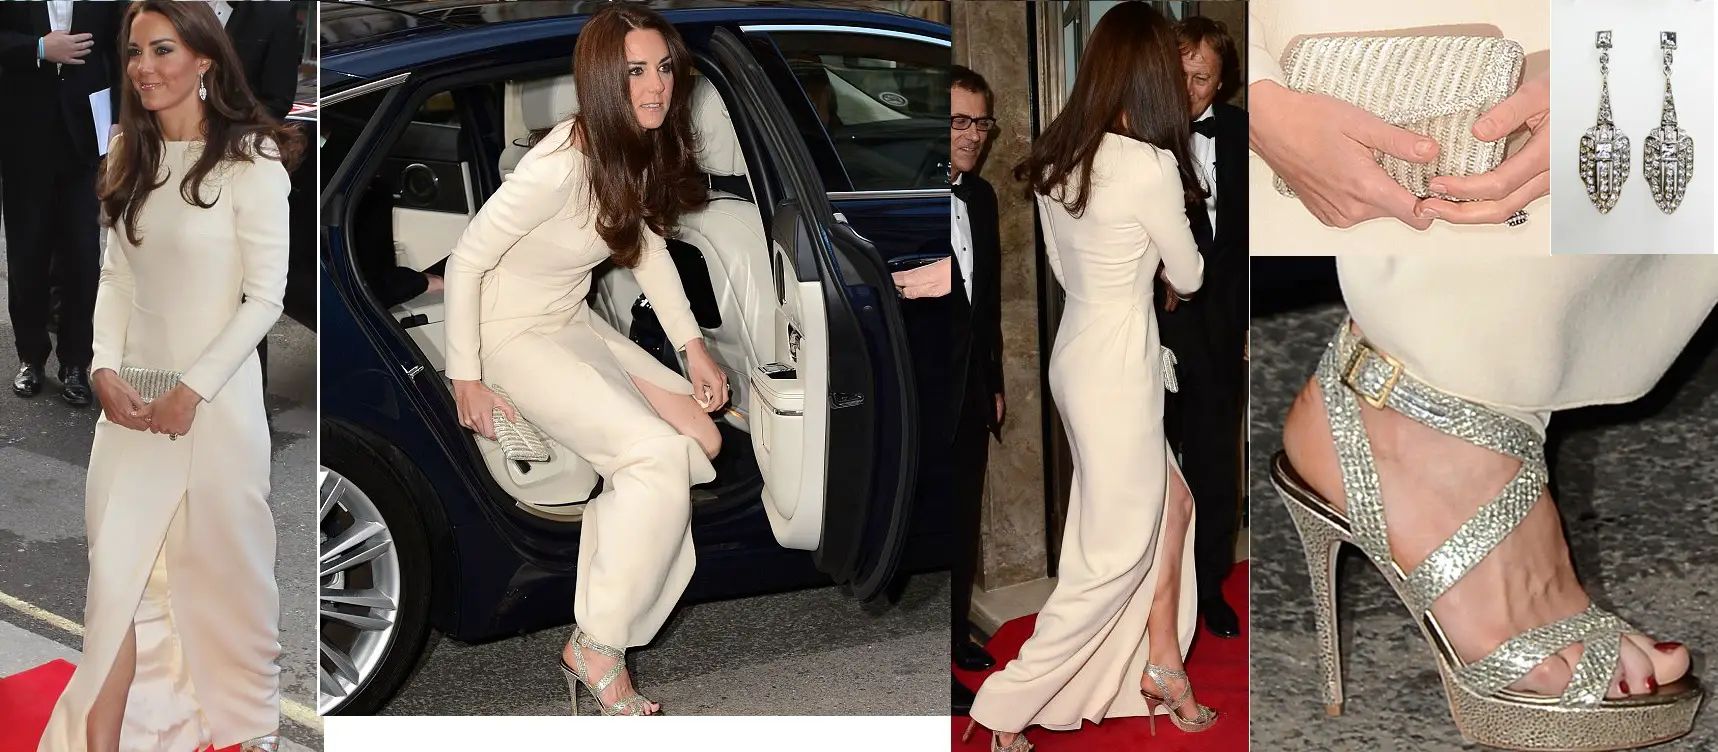 Duchess of Cambridge wore Roland Mouret for a Private Dinner in 2012